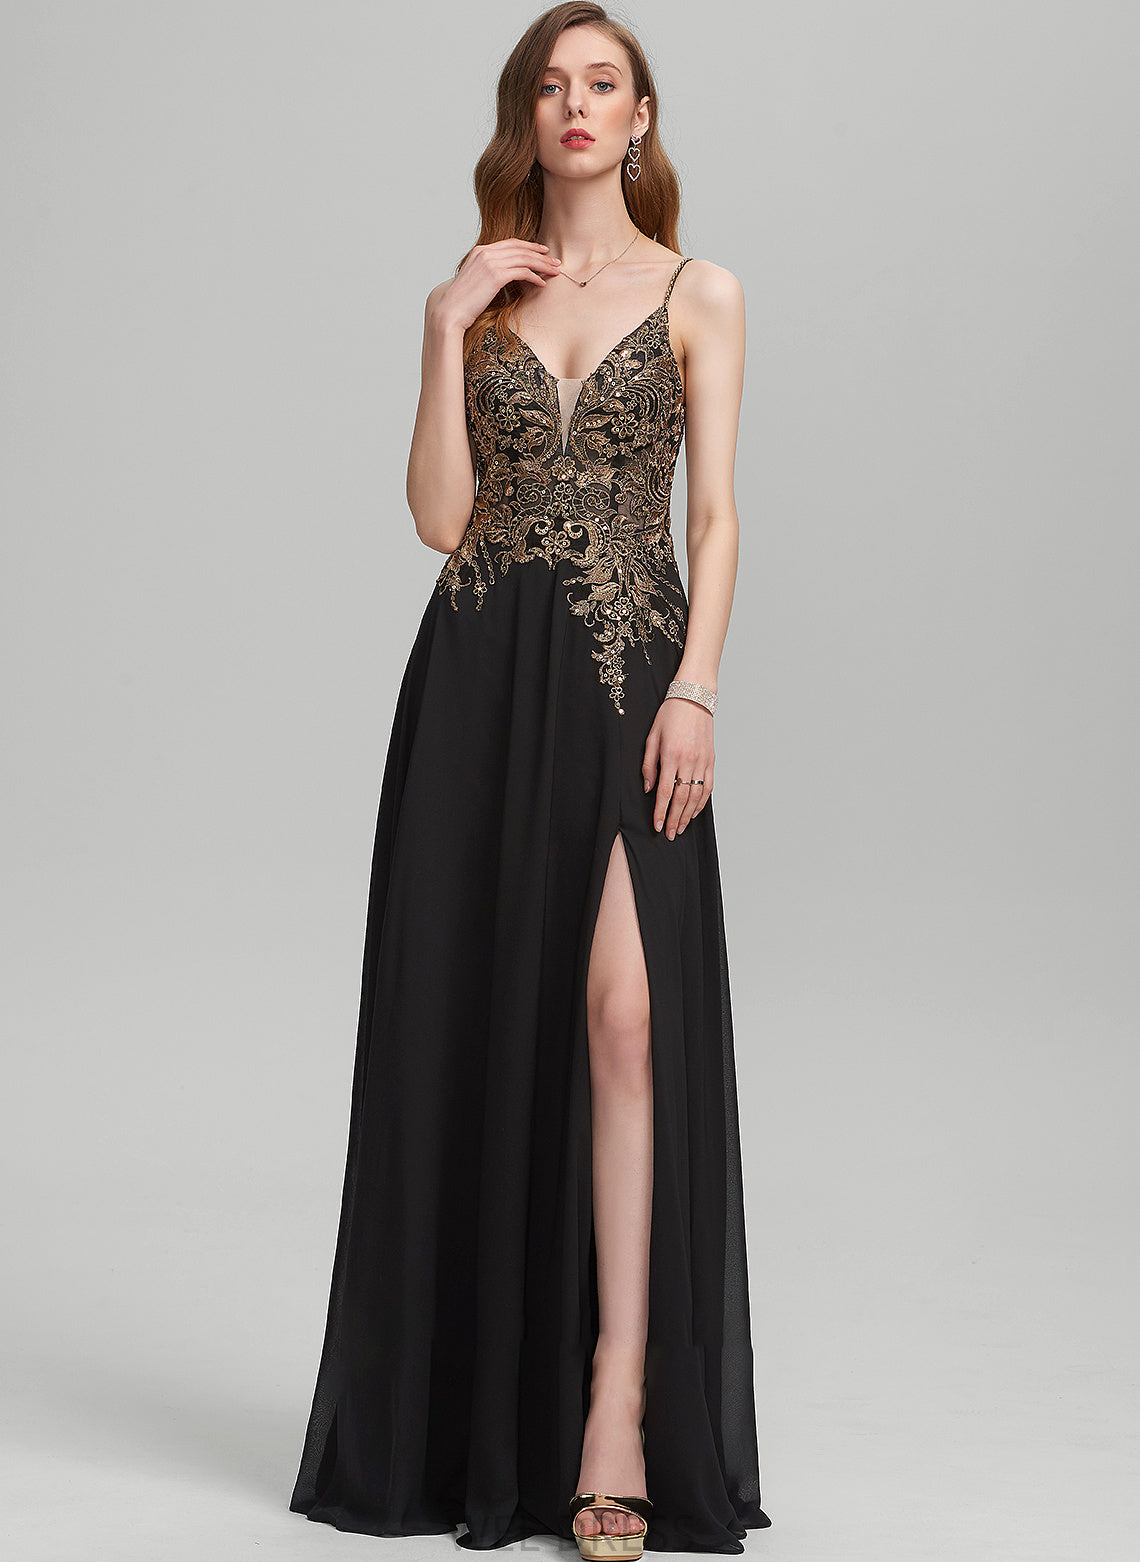 Lace Chiffon Prom Dresses Split With Sequins Floor-Length V-neck A-Line Lydia Front